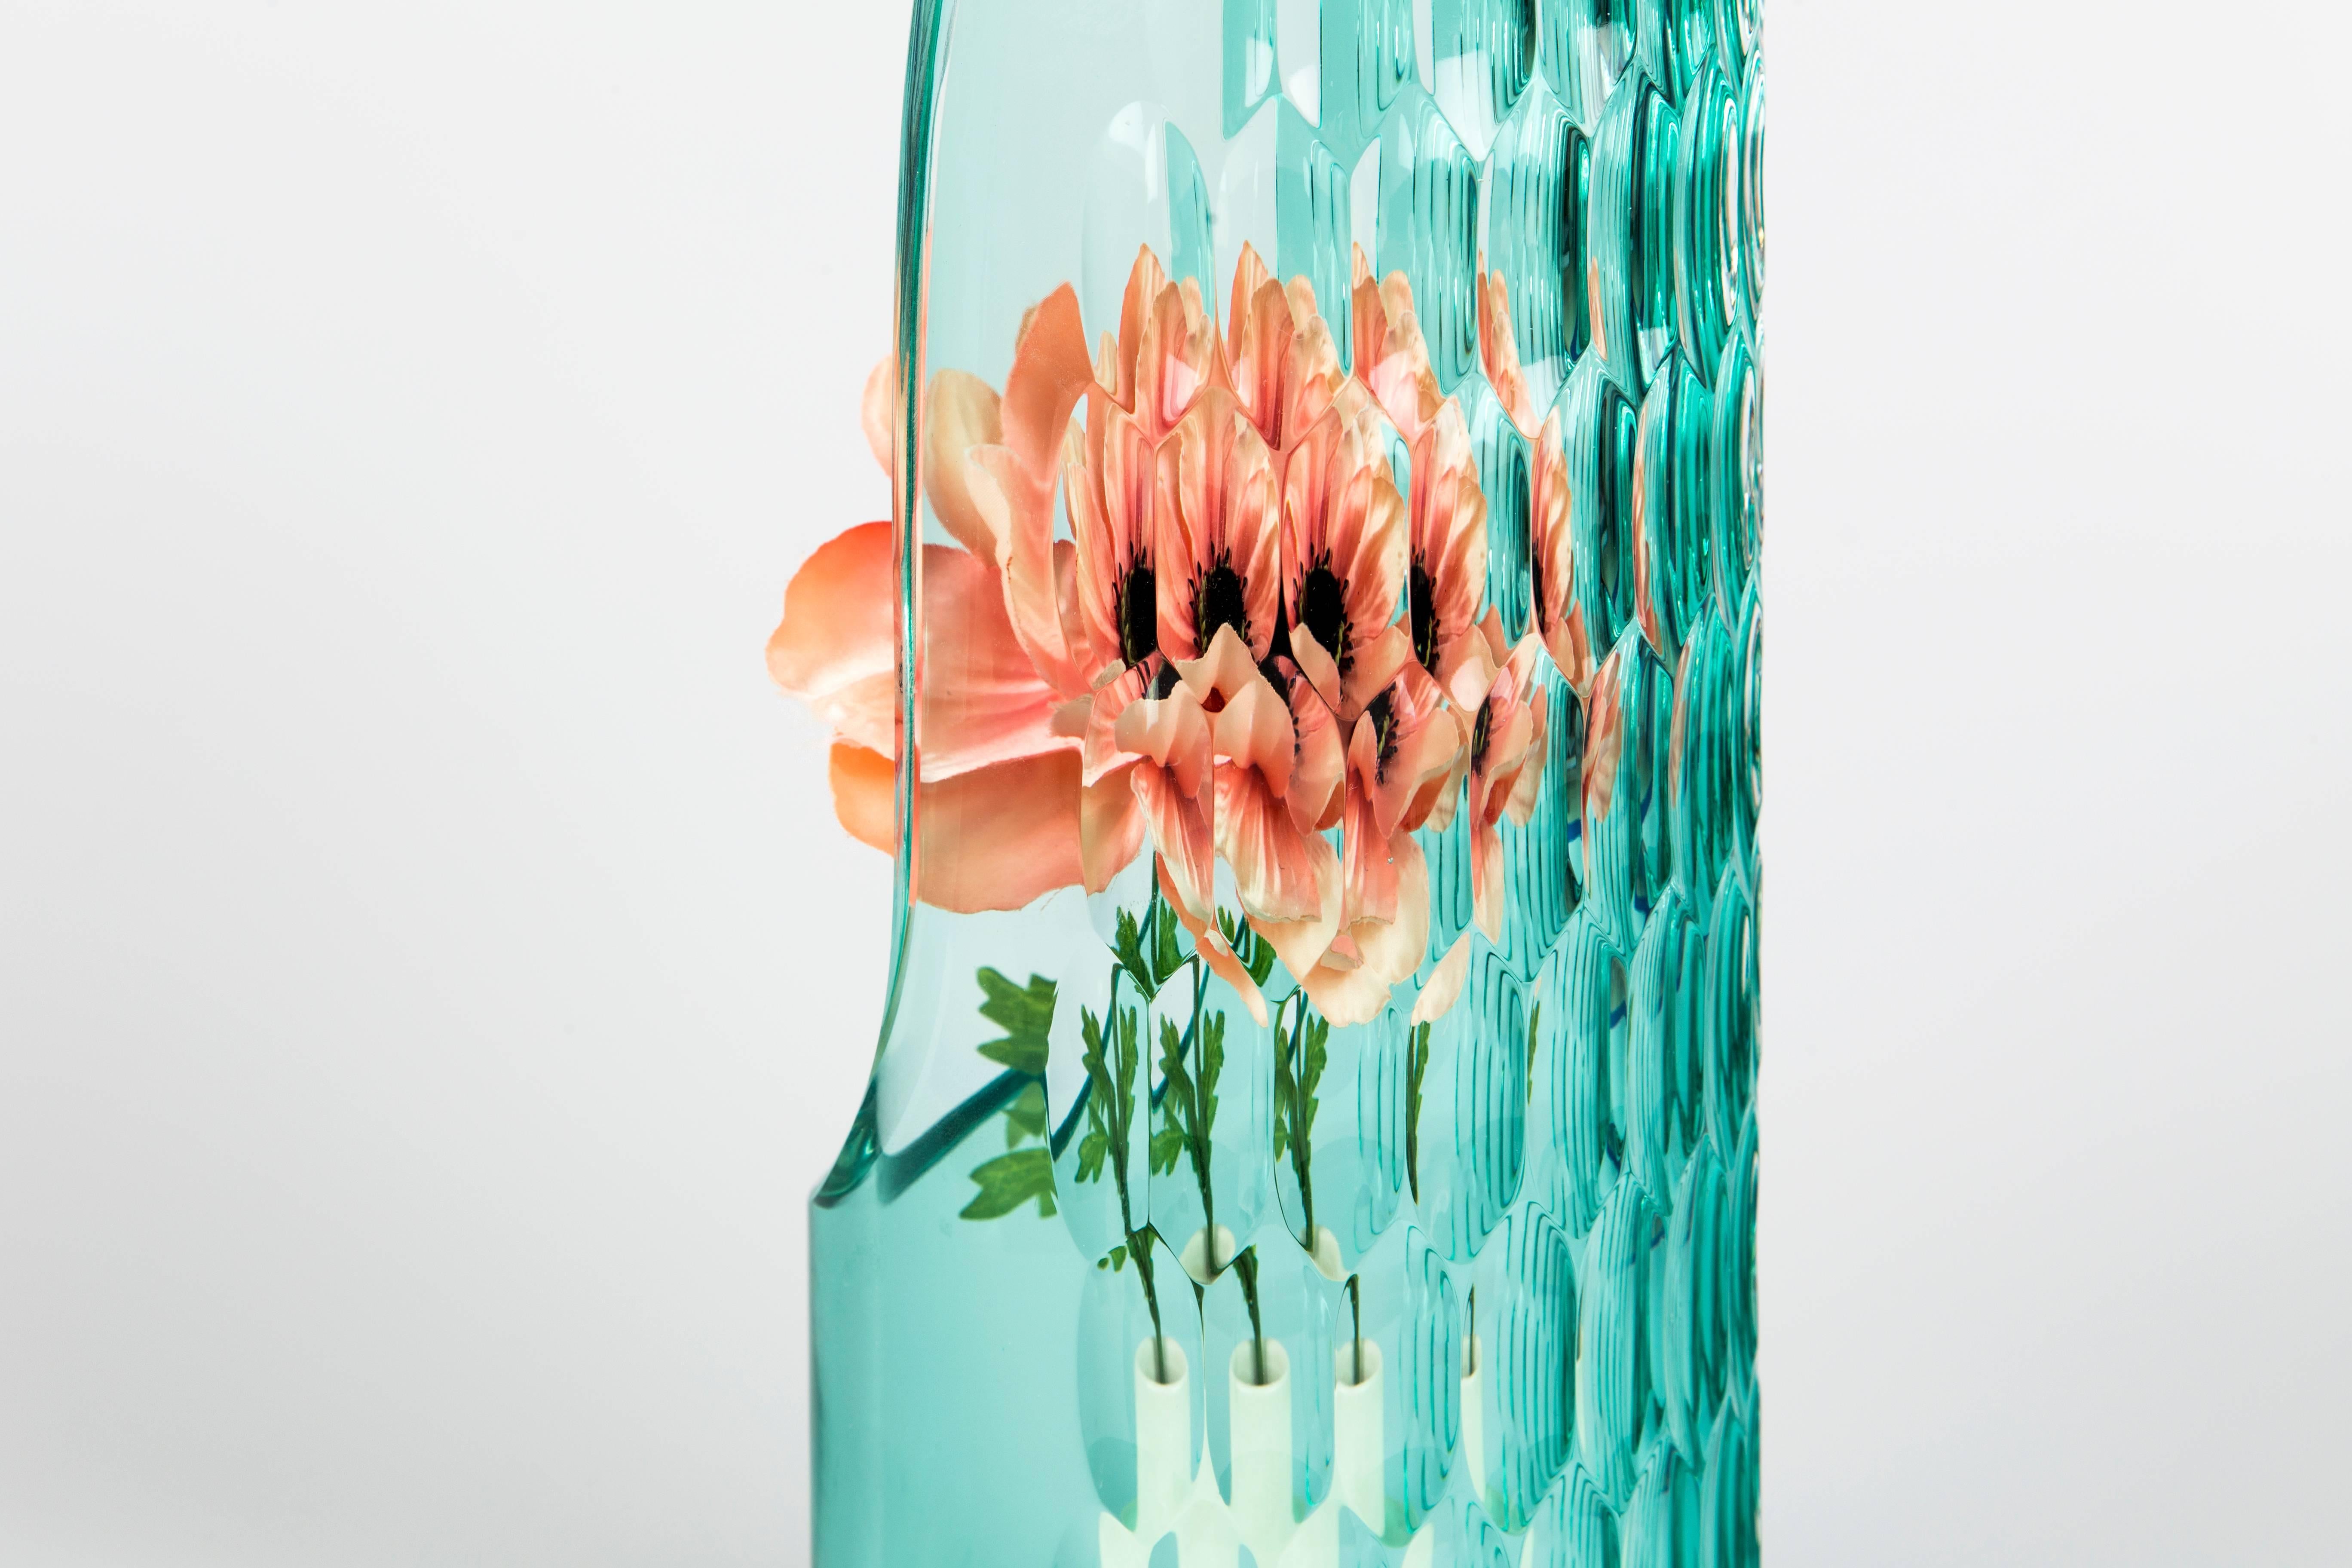 A signature quality of each handcrafted glass vase is the illusion created by its complex pattern of cuts. A kaleidoscopic effect is created within each glass form, so that when viewed from different angles, a single ower placed within it, OP-Vase